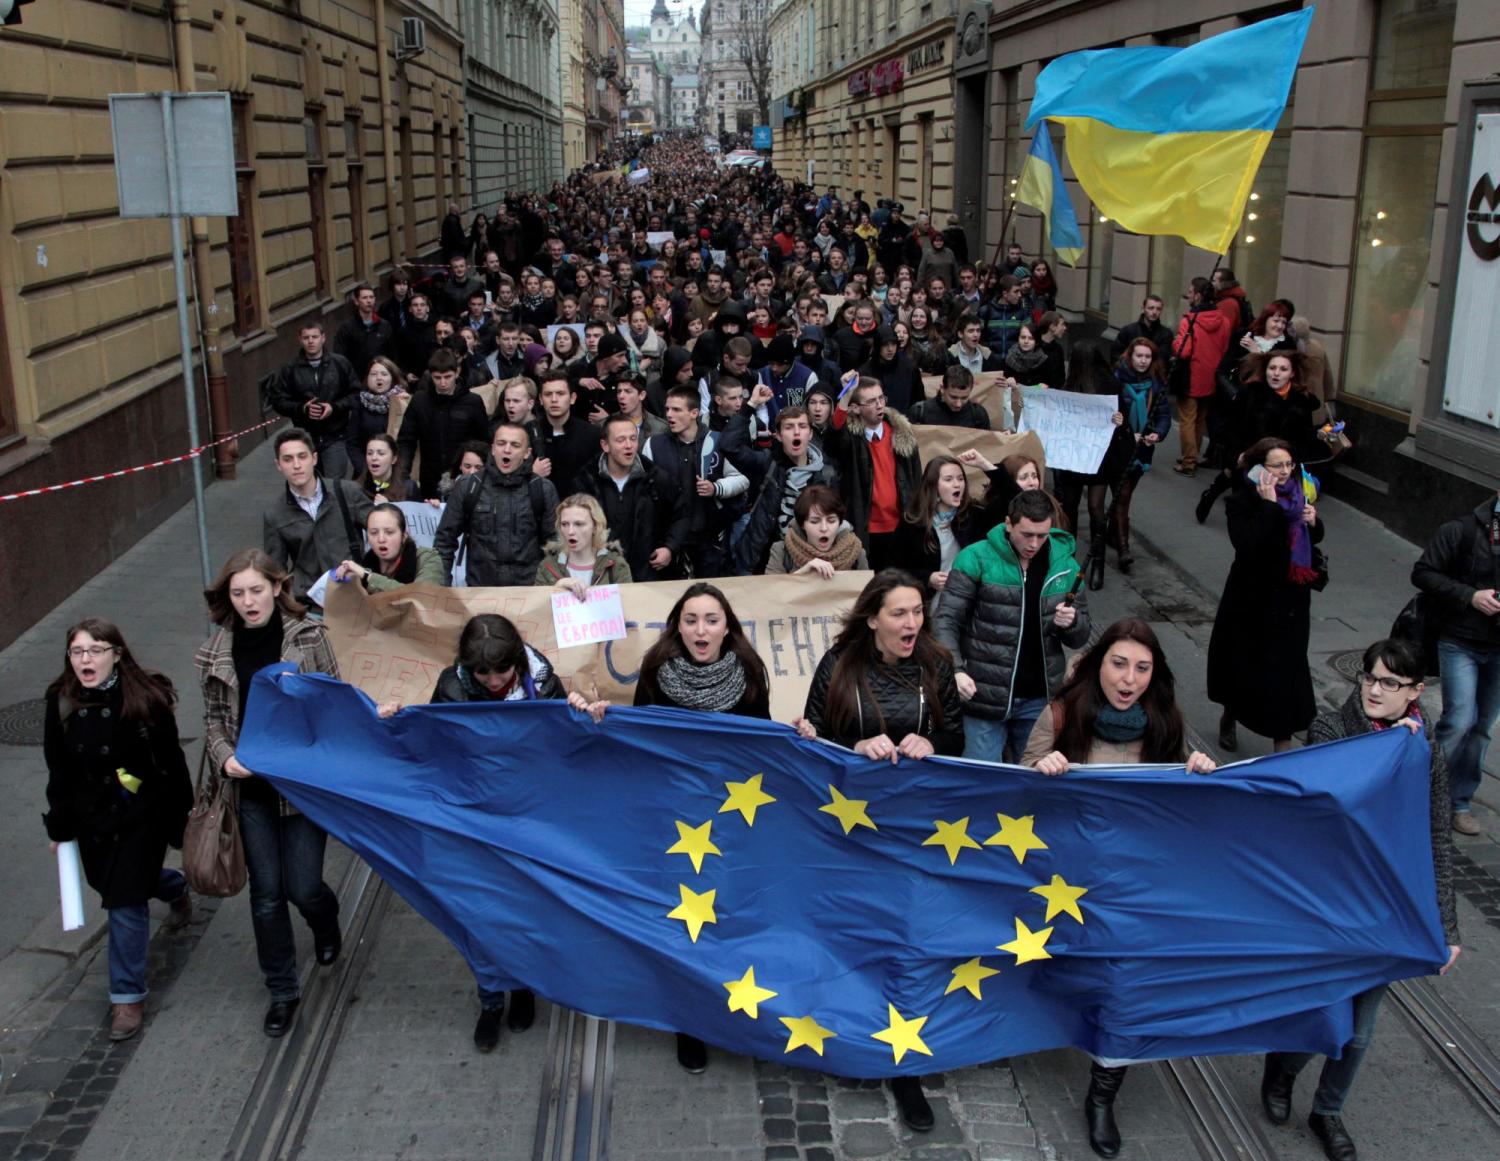 Students hold Ukrainian and European Union flags during a rally to support euro integration in the central area of the western Ukrainian city of Lviv, November 22, 2013.